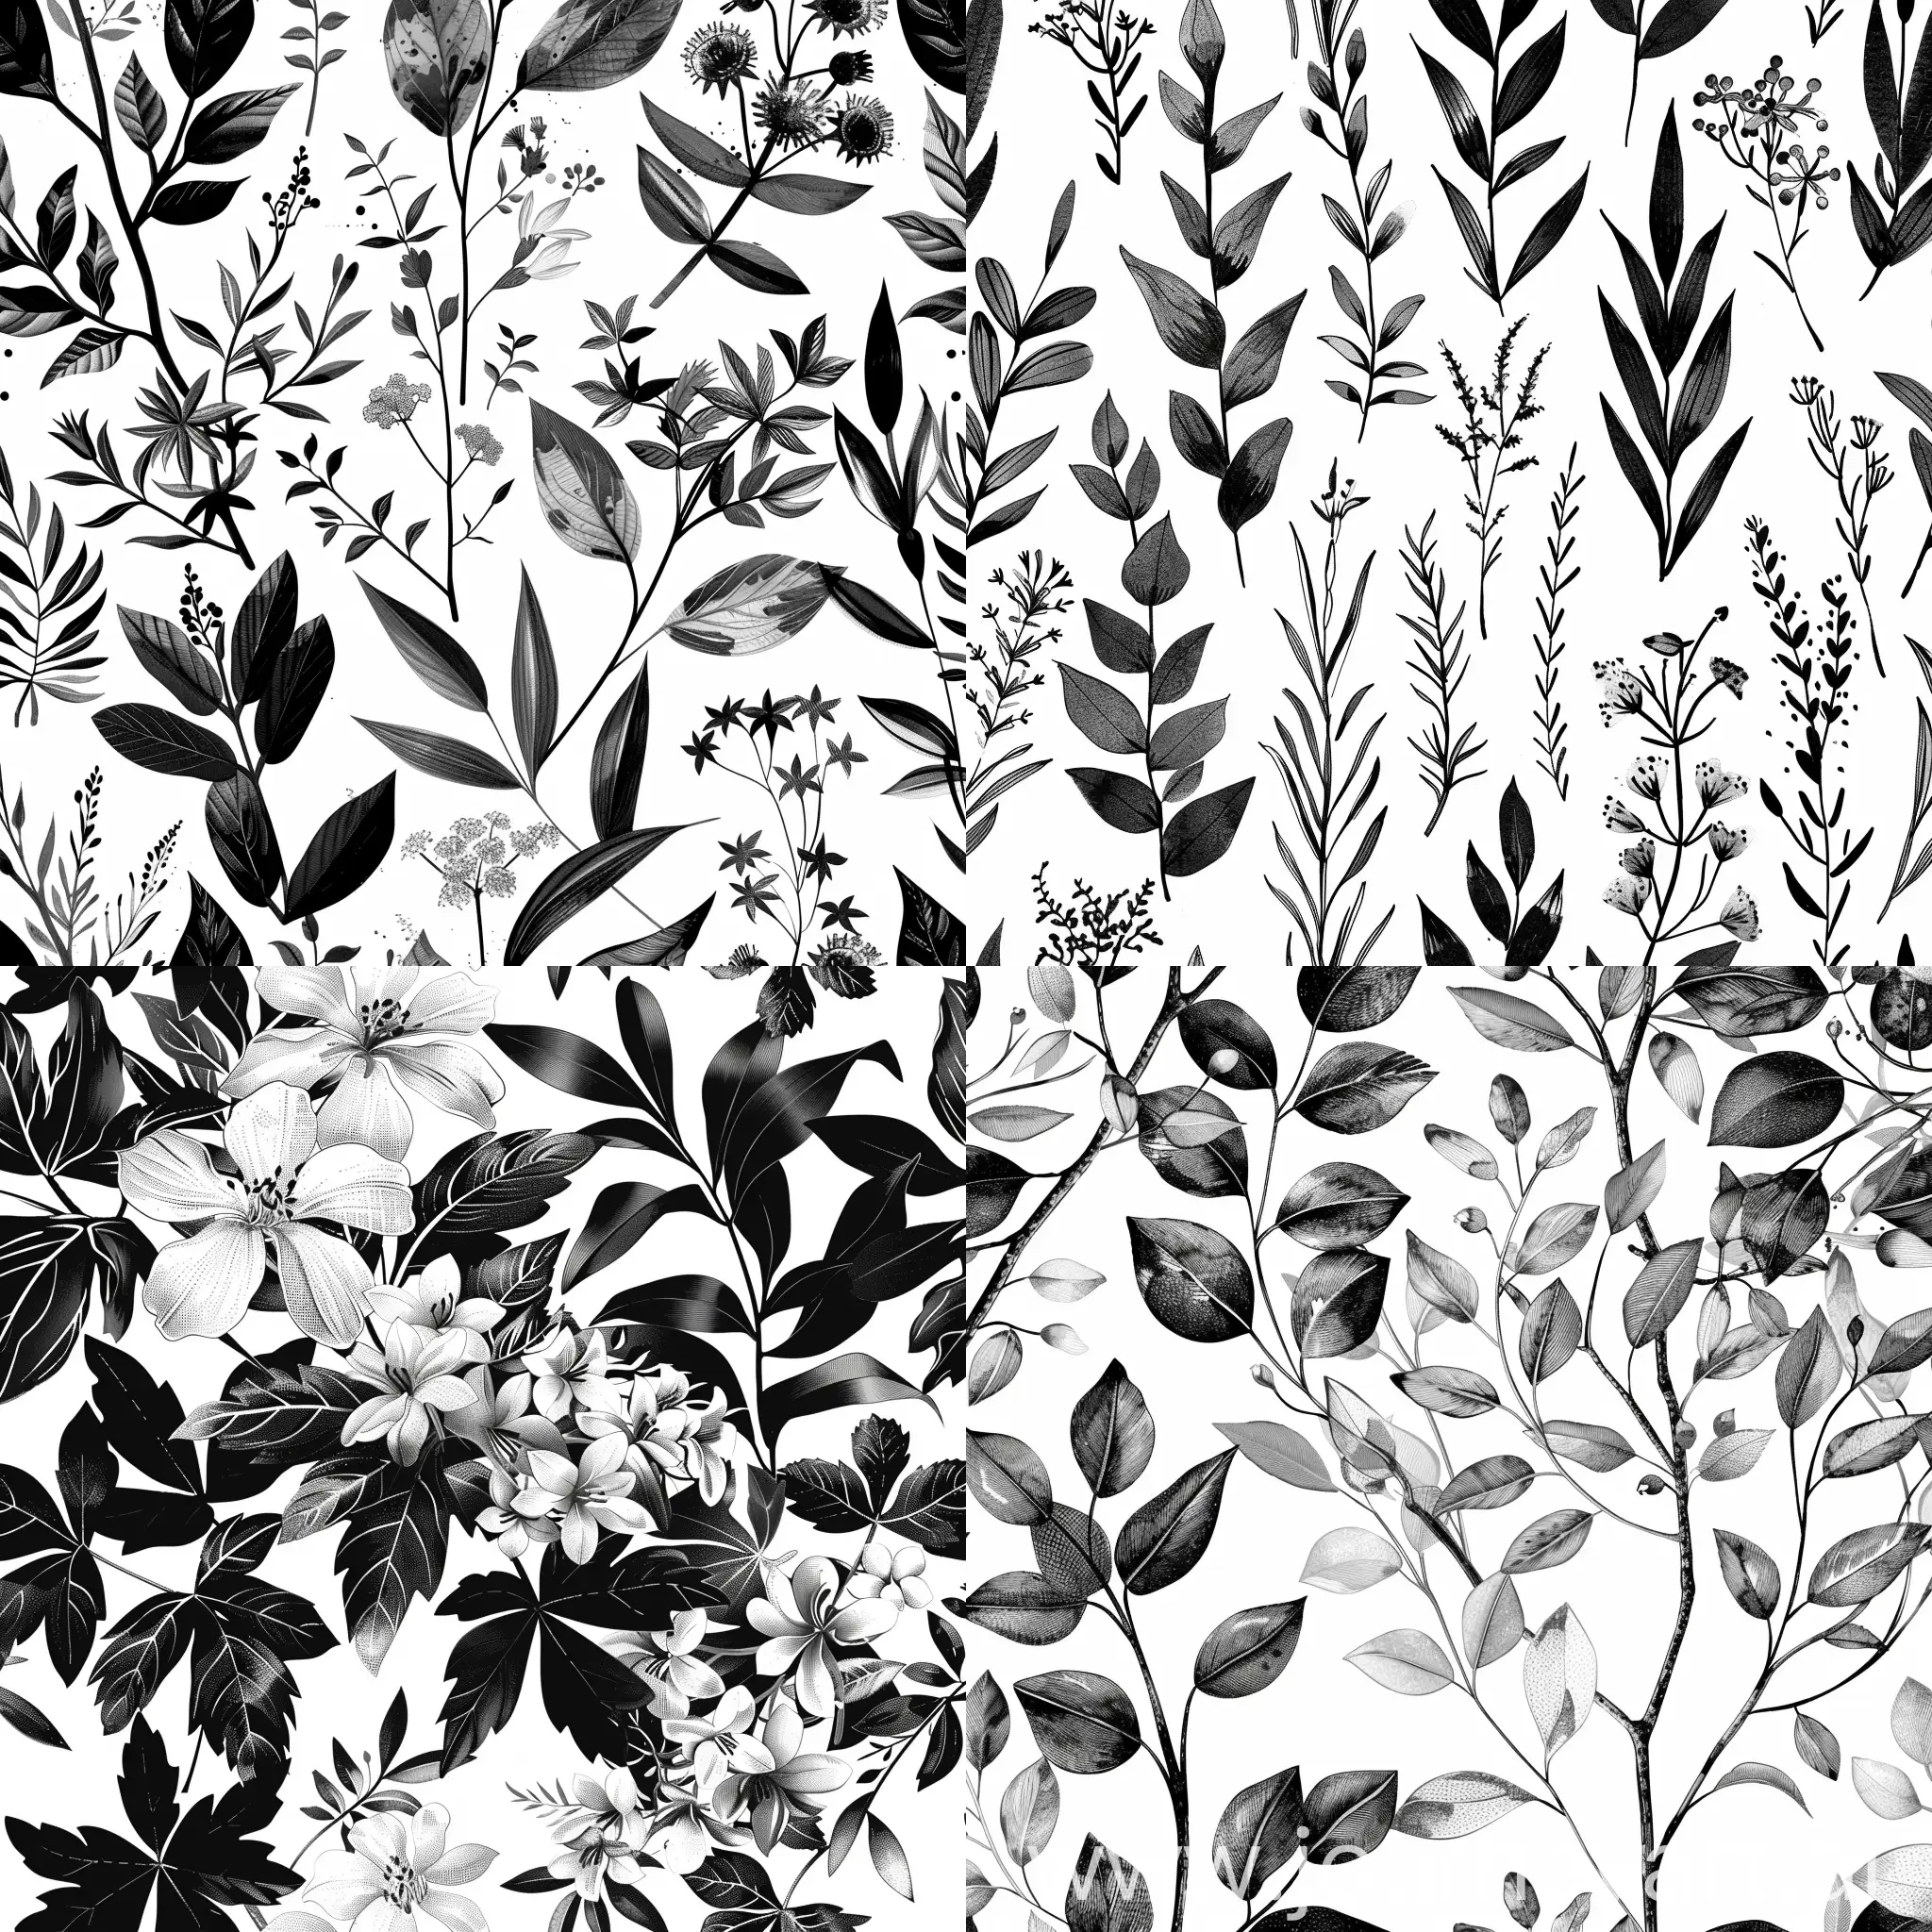 Monochrome-Botanical-Pattern-Design-Intricate-Composition-in-Black-and-White